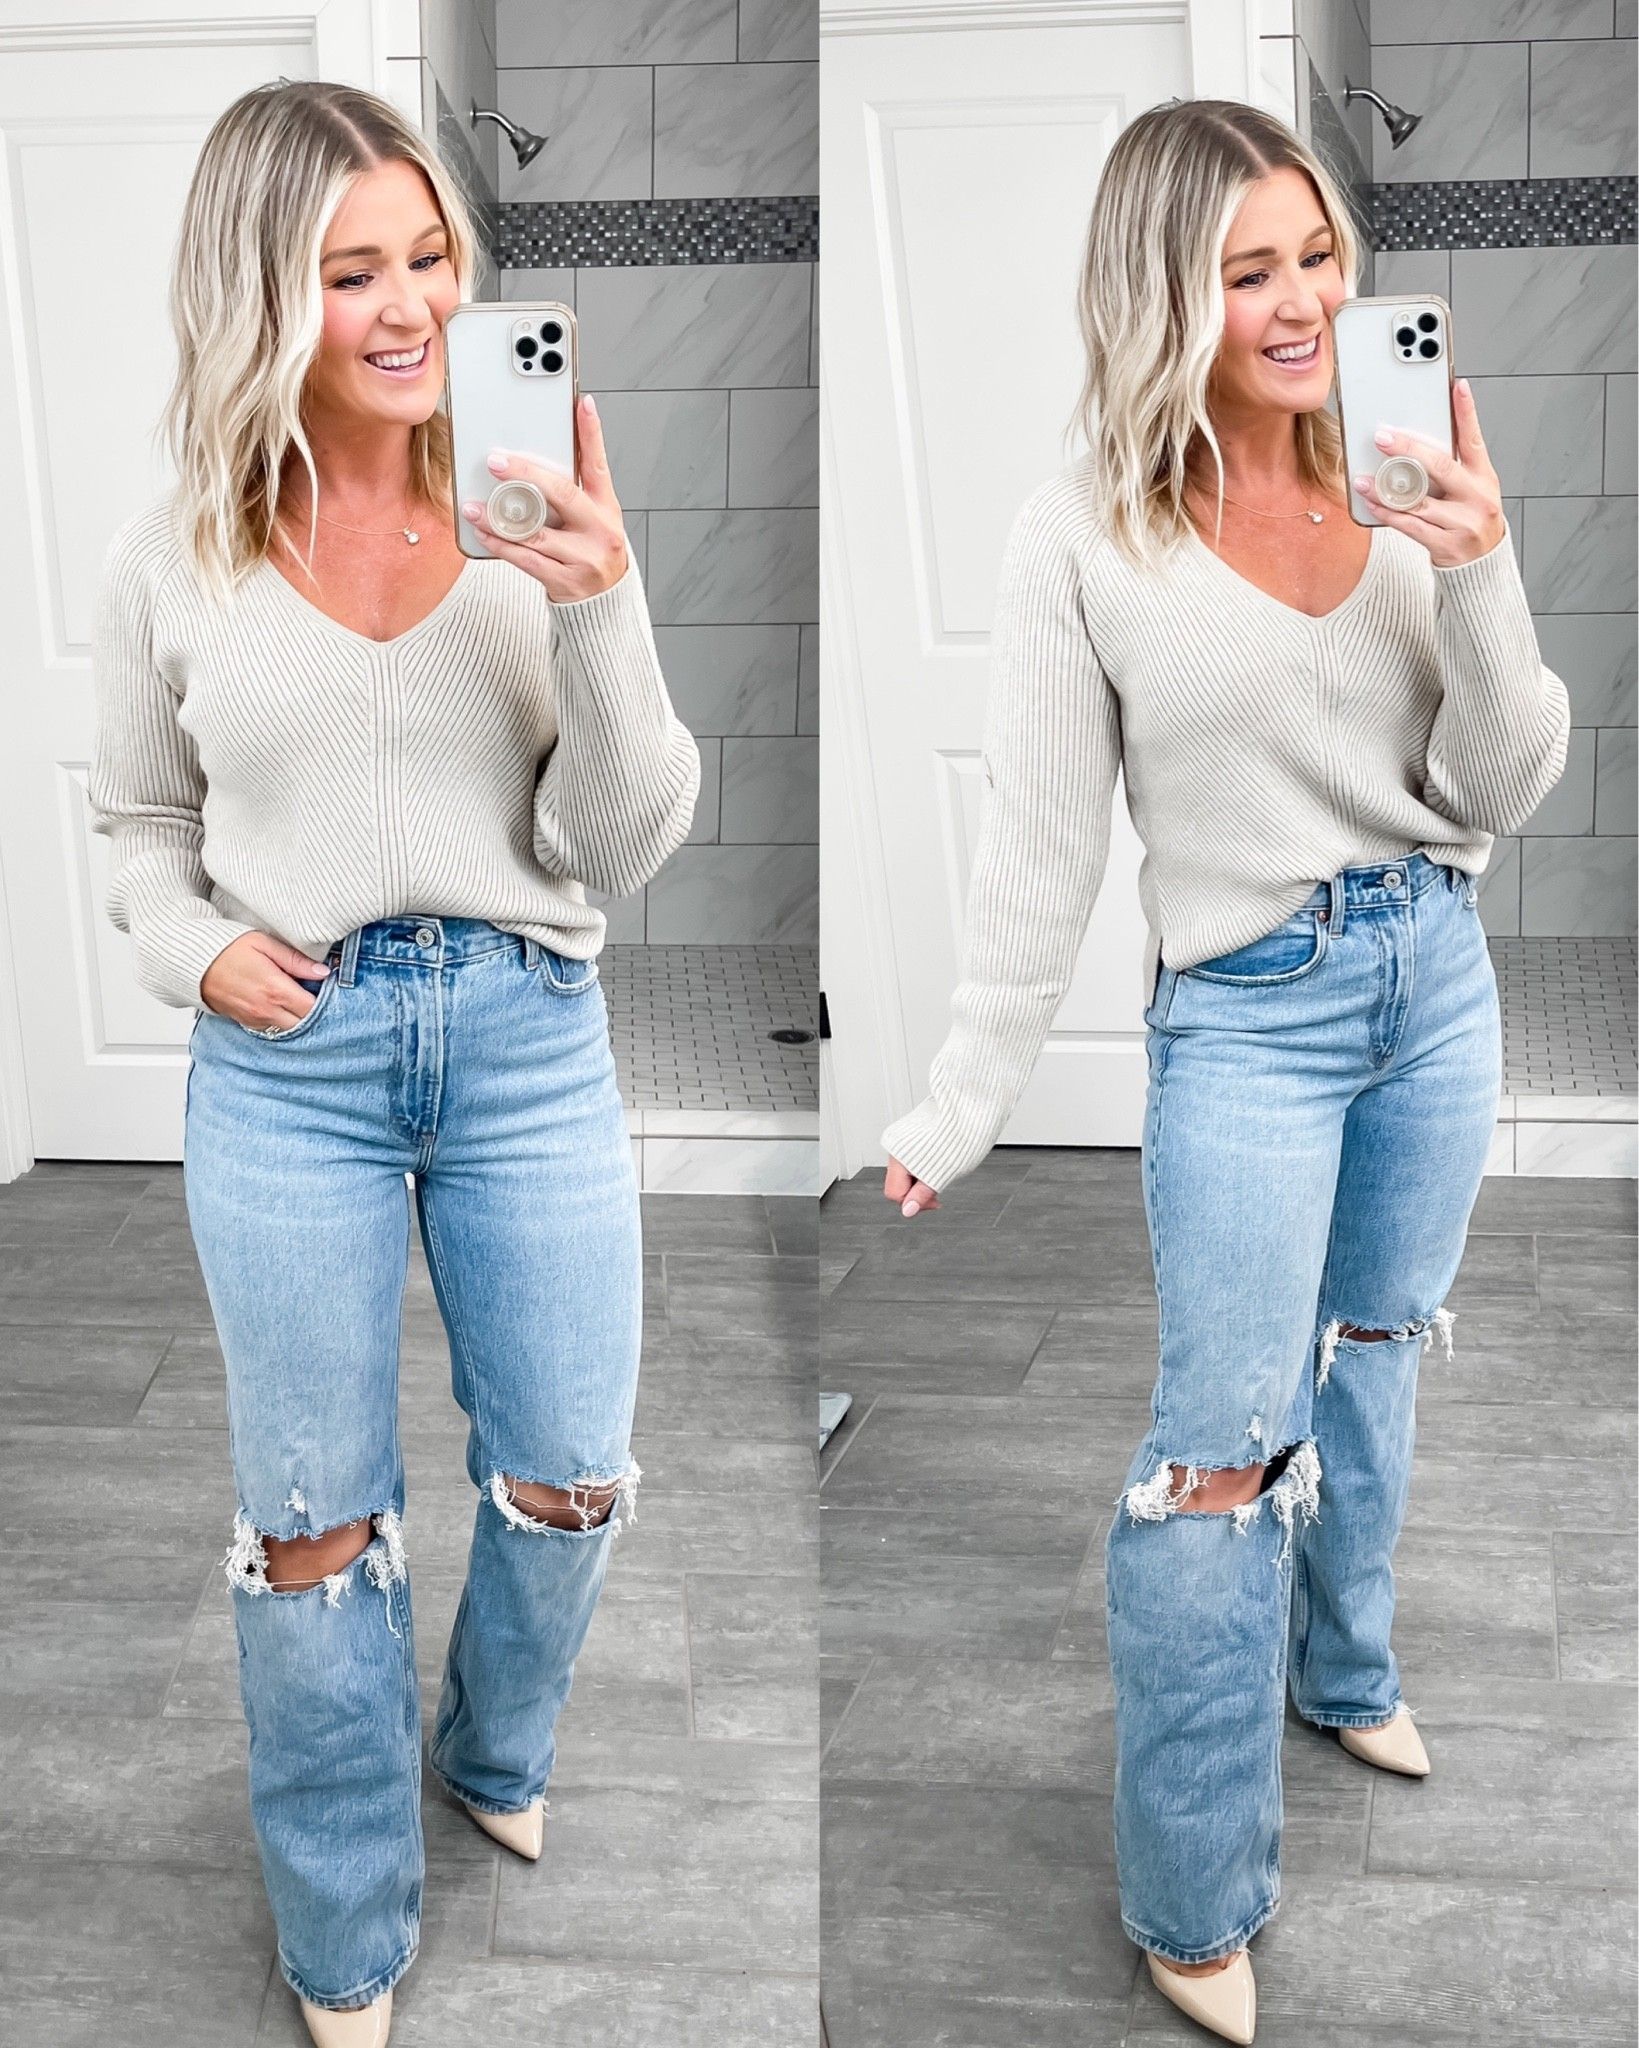 V-Neck Sweater Outfit Ideas